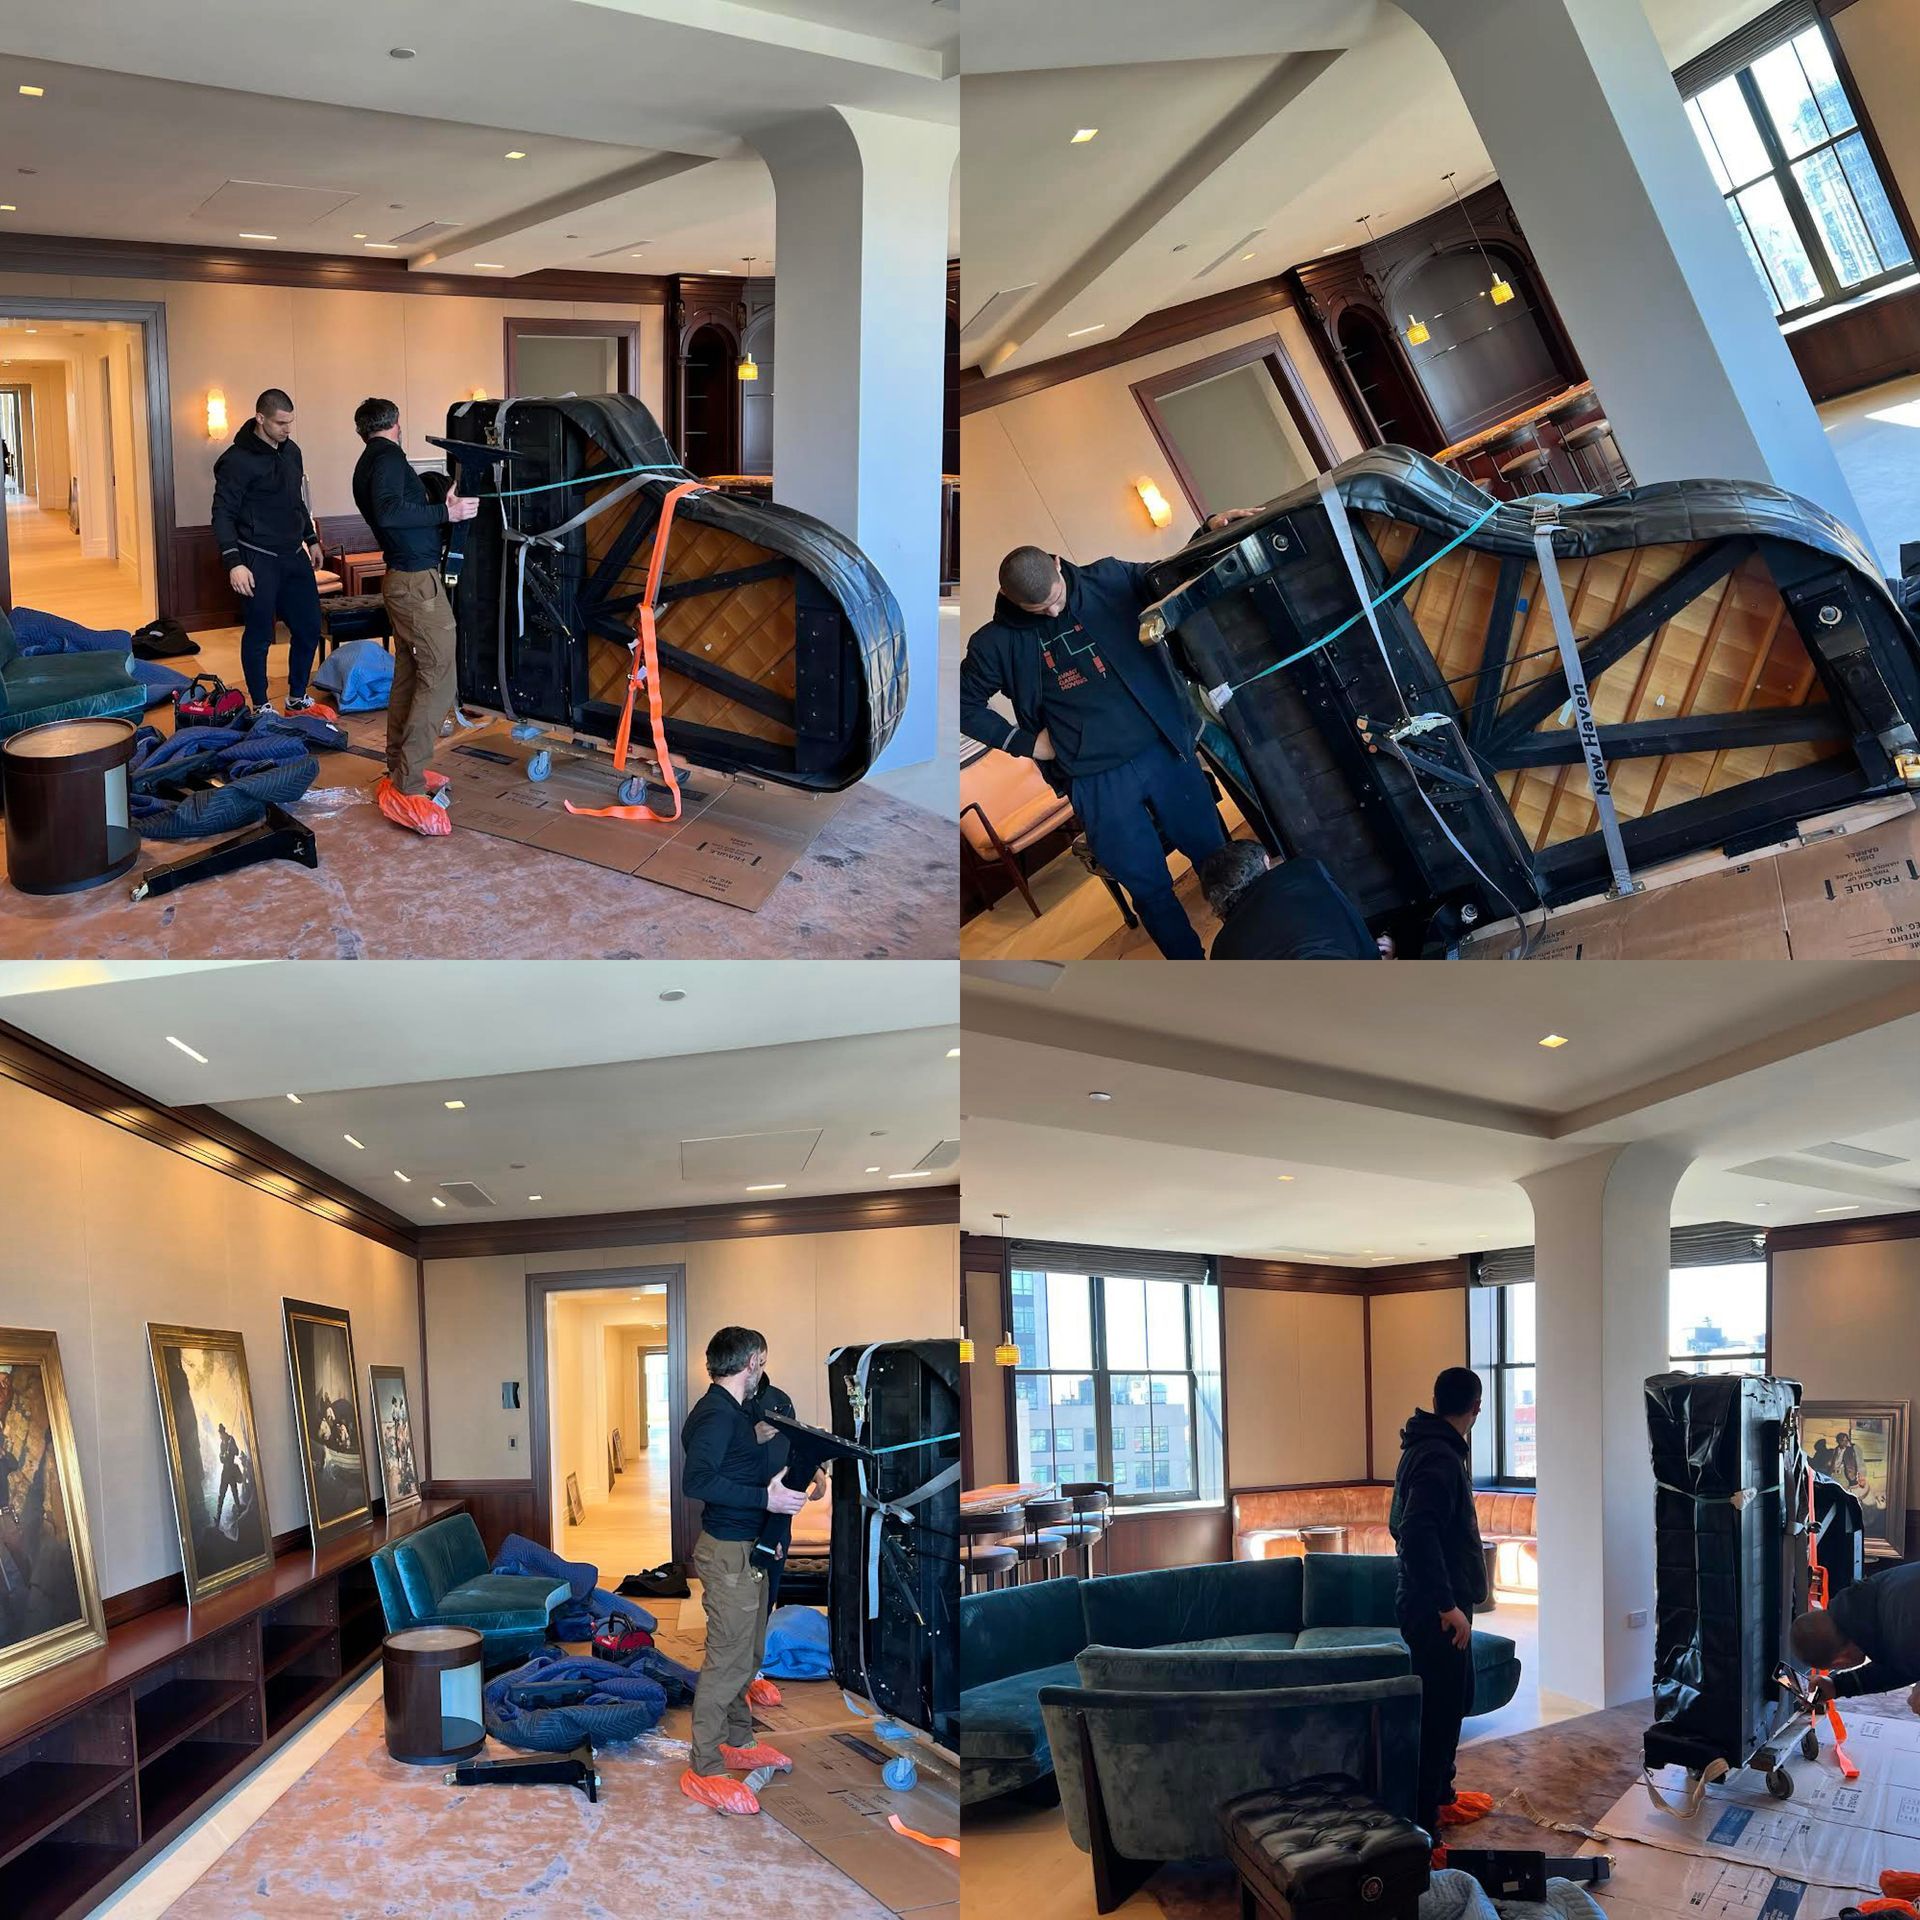 4 photos in one, of a movers wrapping up grand piano to get it ready for moving